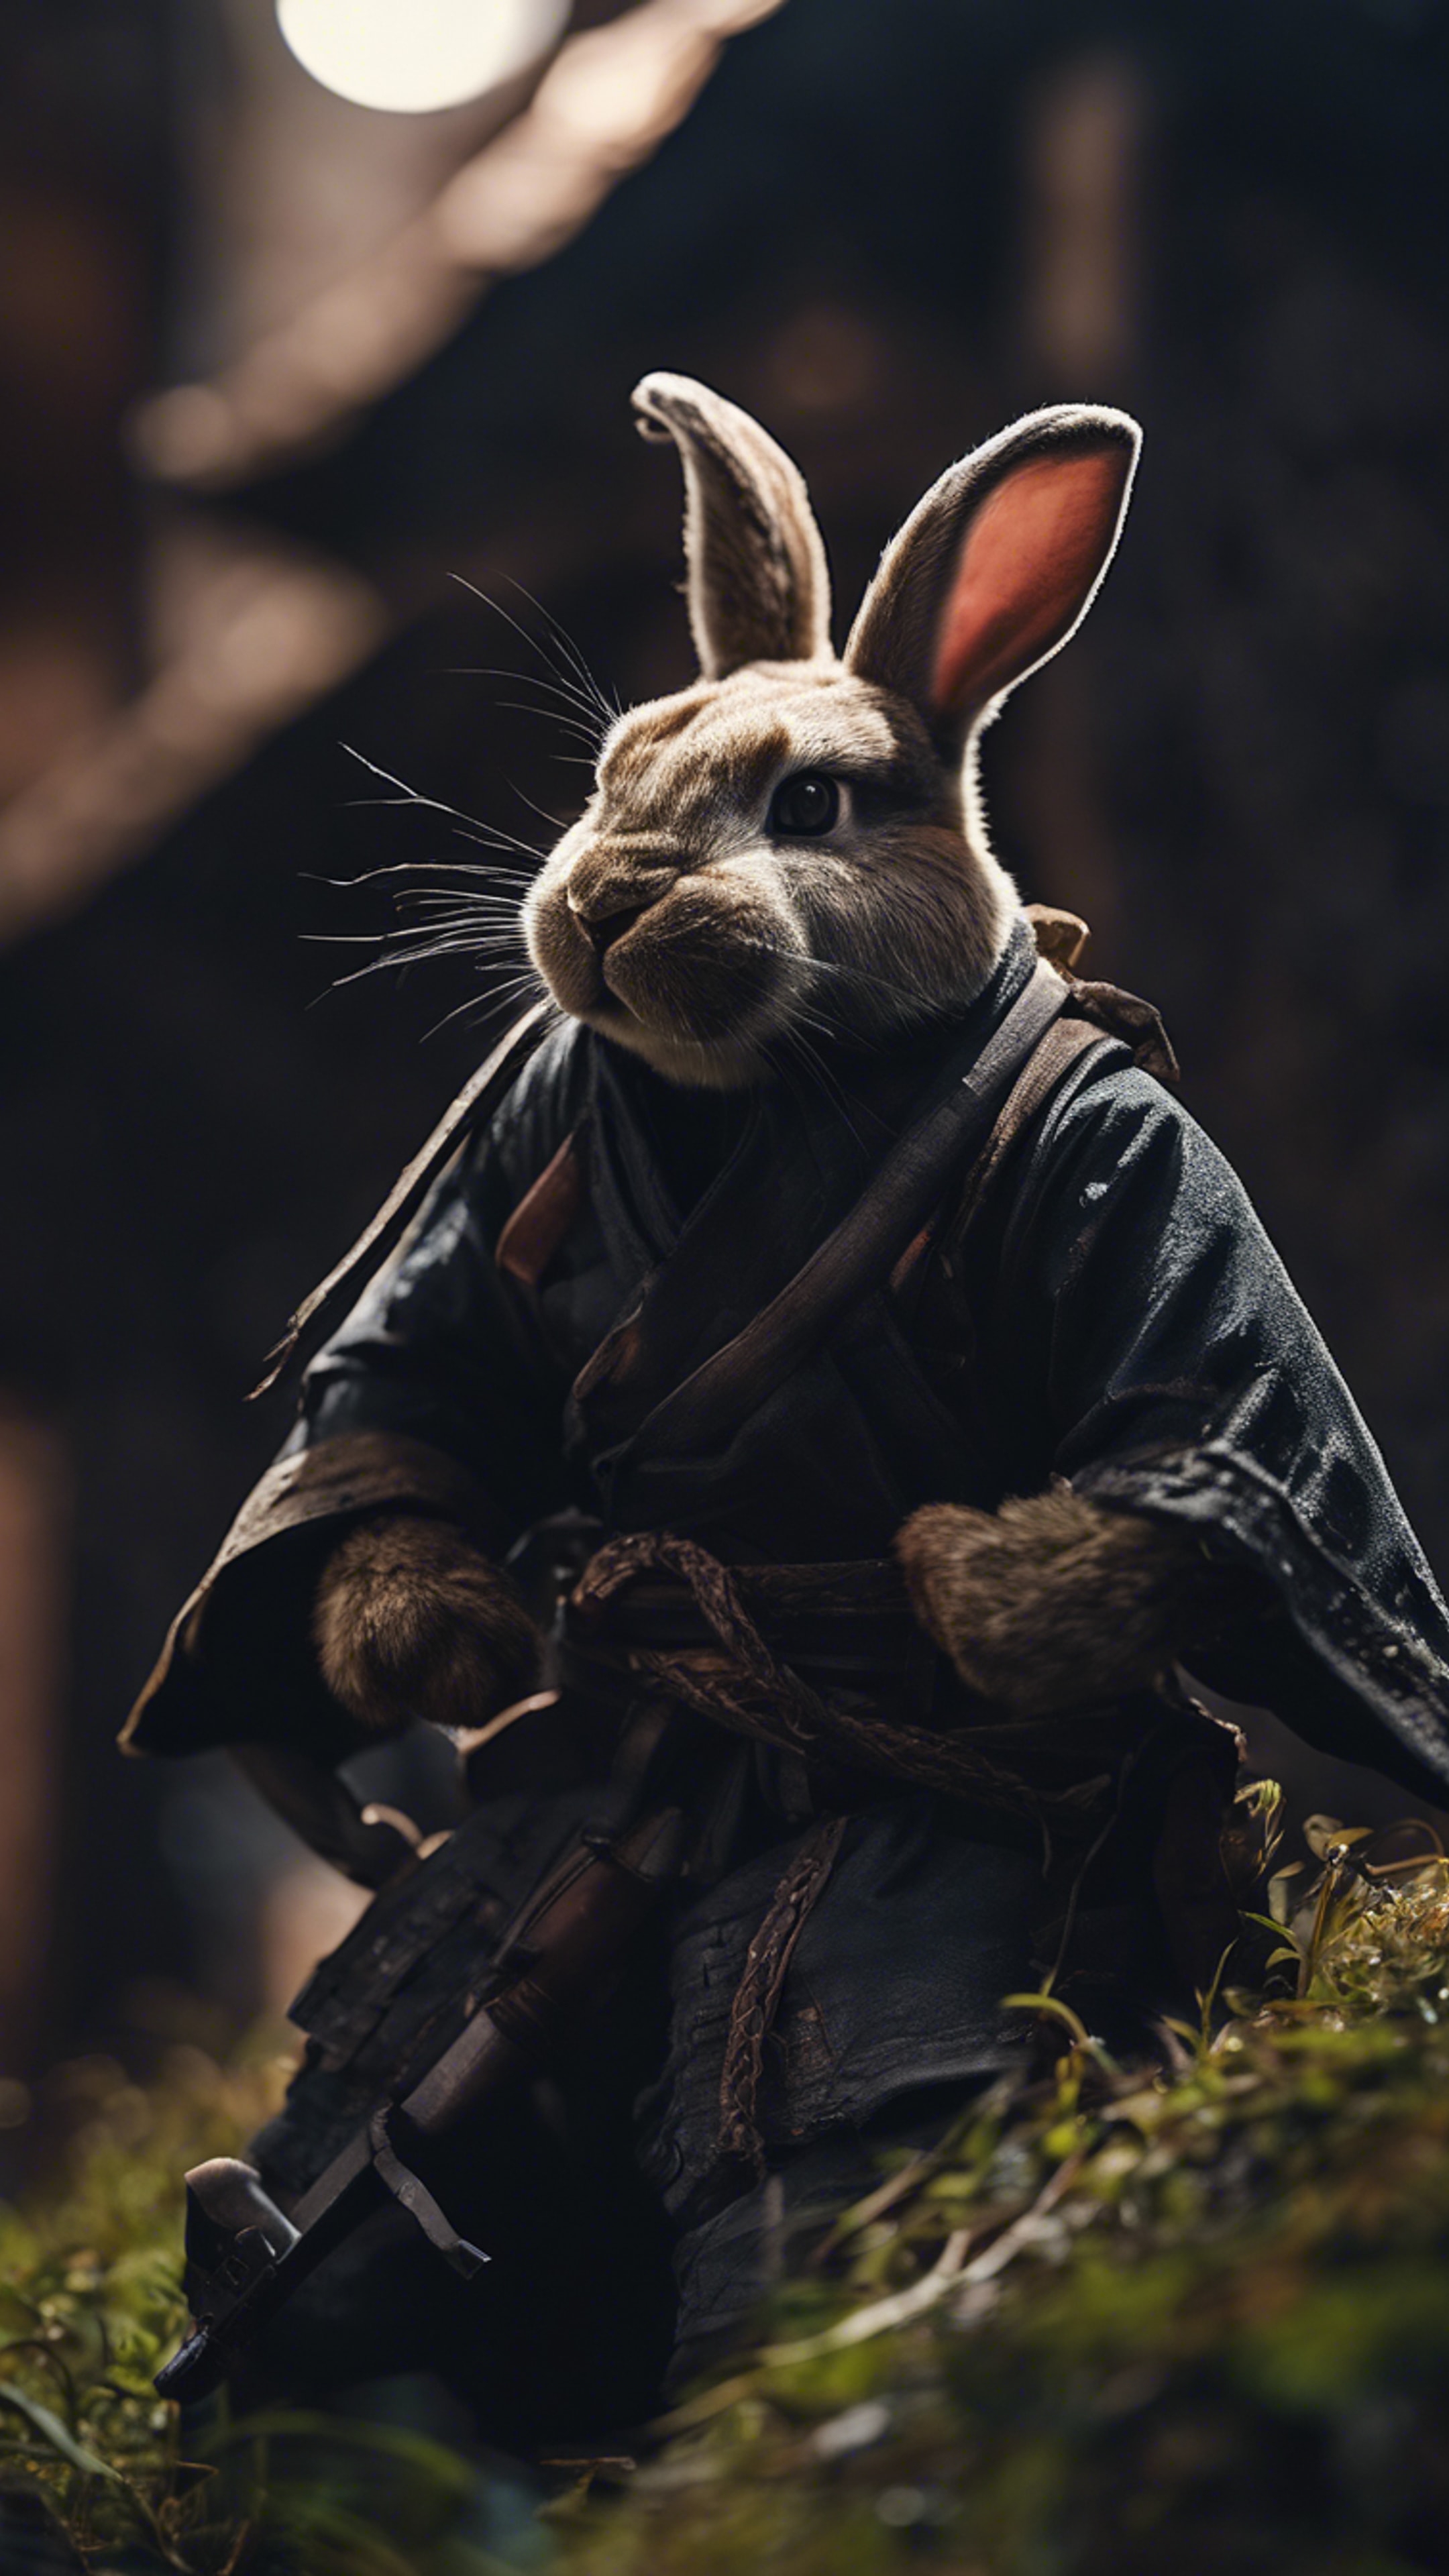 A rabbit ninja stealthily infiltrating a fortress under the cover of darkness.壁紙[6531f33b70ff4f28bd8a]